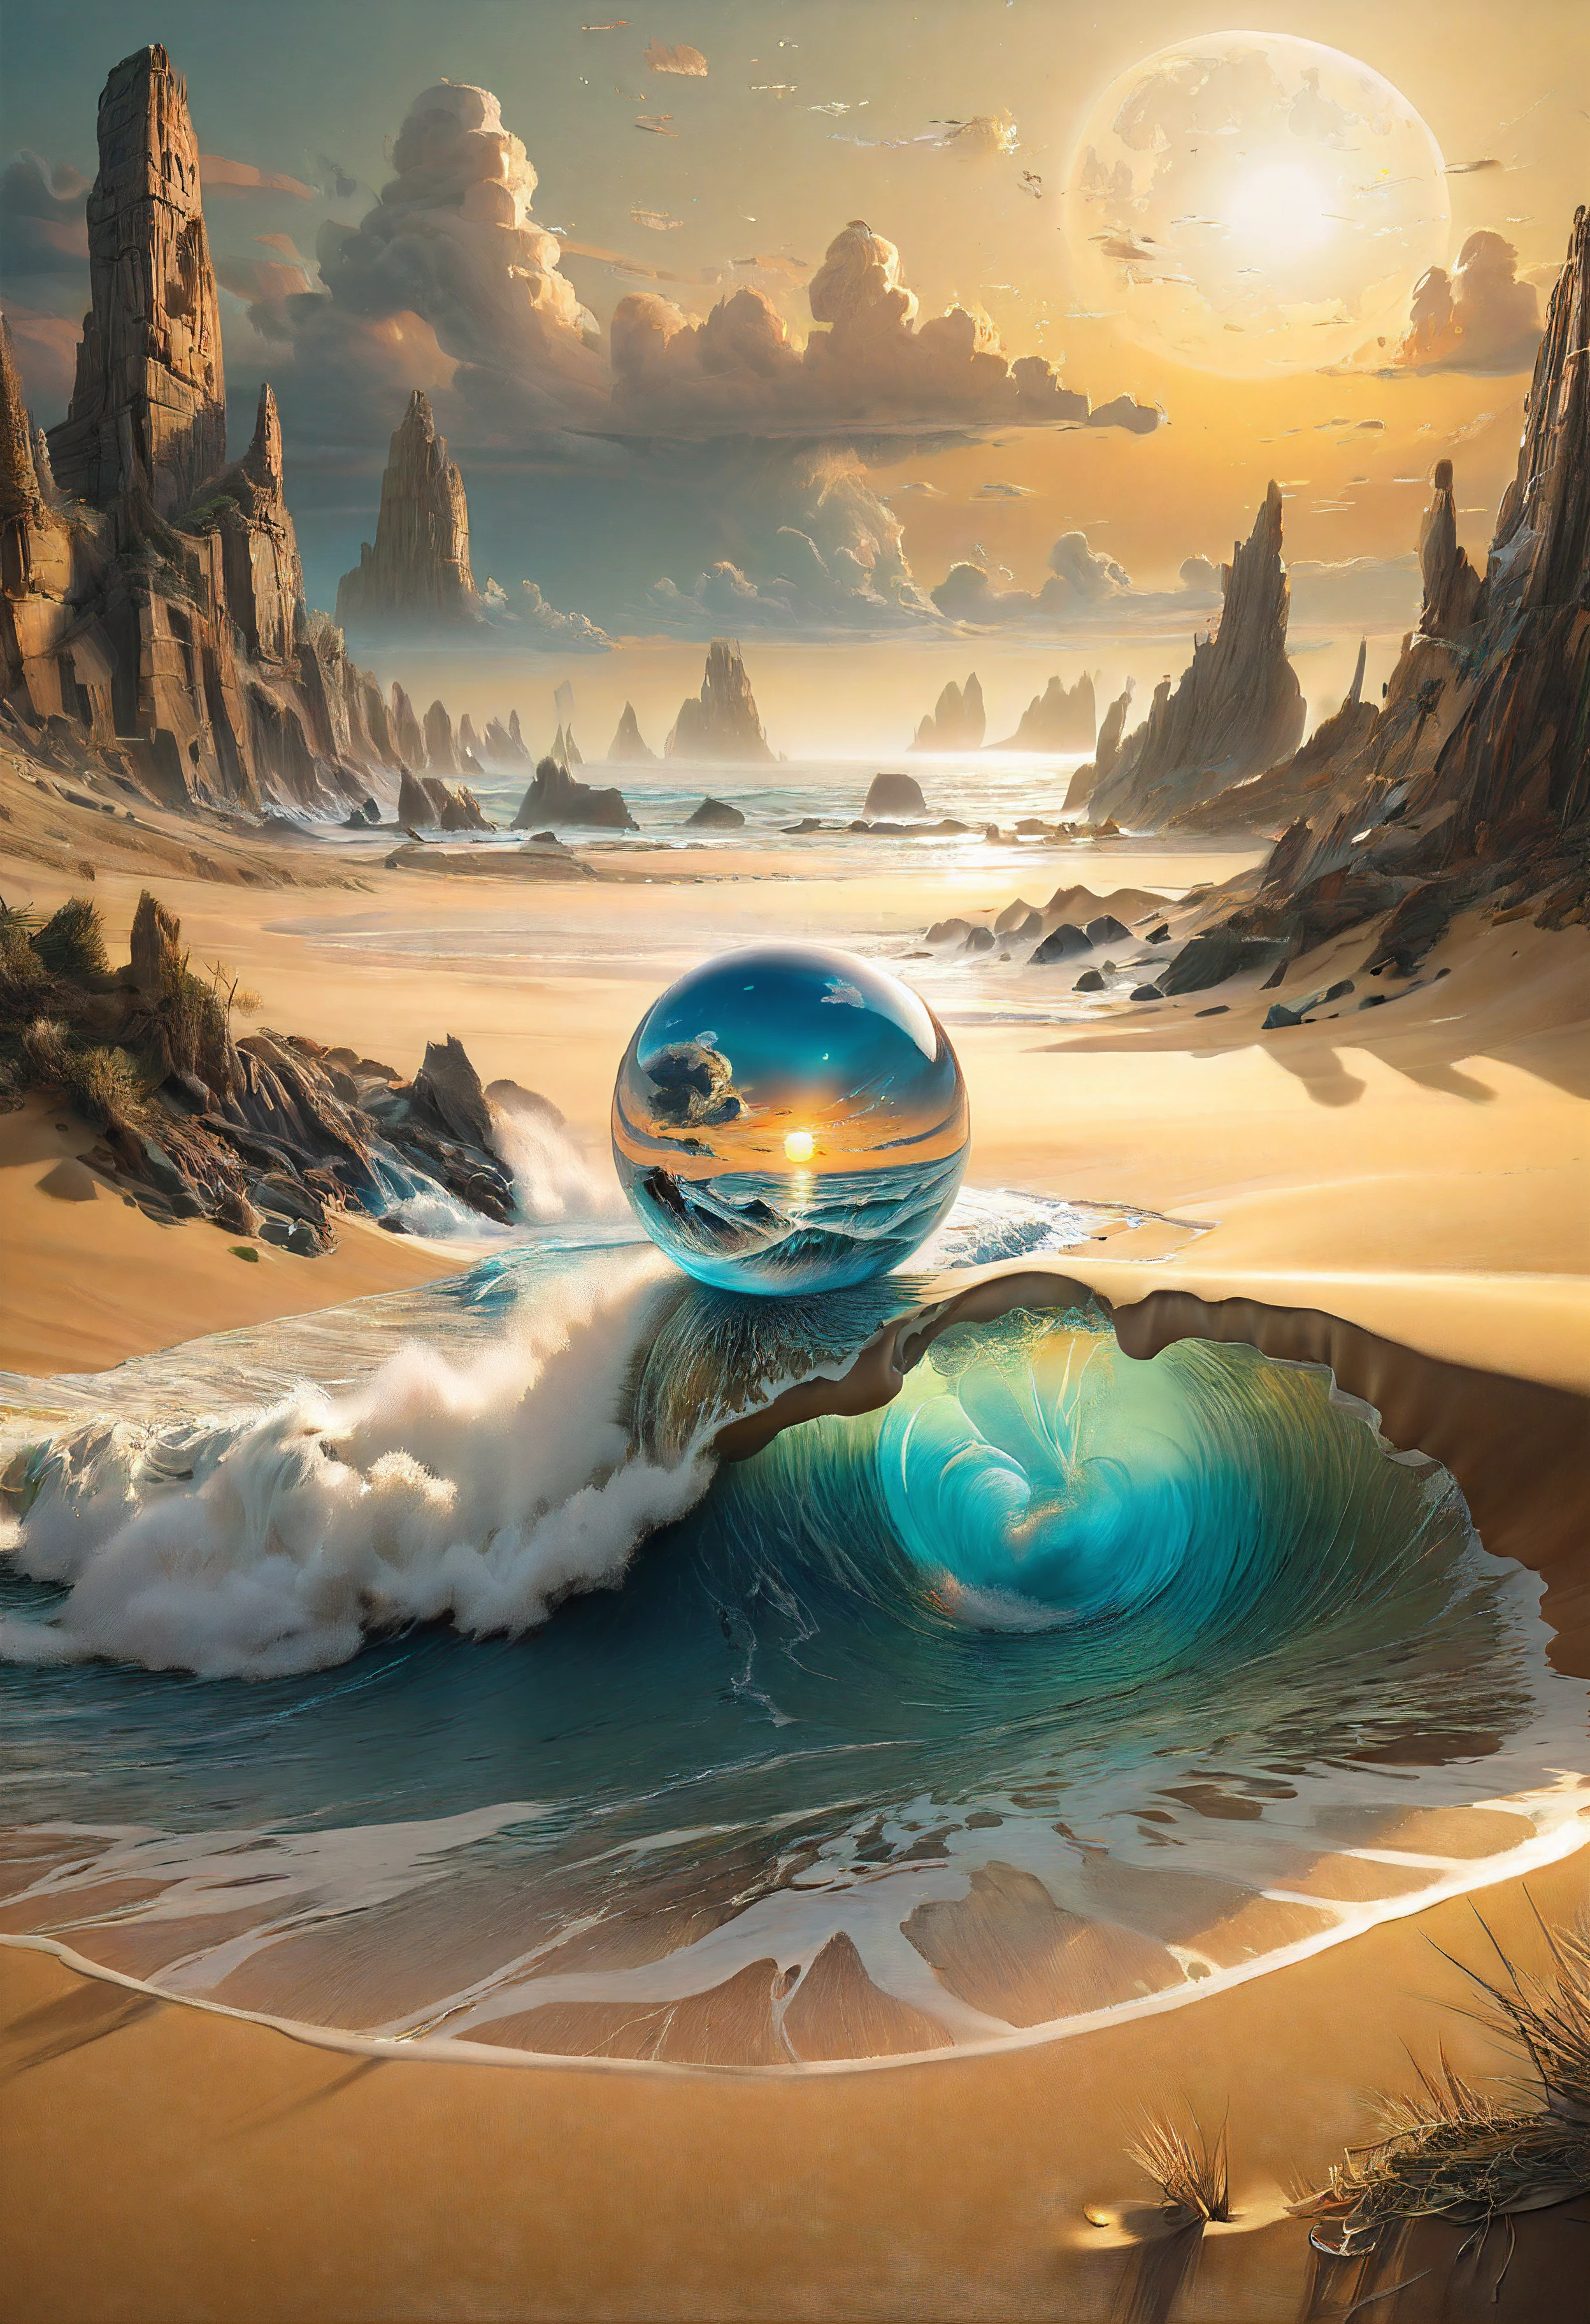 (best quality,4k,8k,highres,masterpiece:1.2),ultra-detailed,(realistic,photorealistic,photo-realistic:1.37), digital art by IrinaKapi, surrealism, sands of time, splash, patterns, floating objects, Yuumei, Robert Bissell, Christopher Balaskas, Keith Mallett, Wassily Kandinsky, acrylic painting, dreamlike atmosphere, intricate details, mesmerizing composition, ethereal beauty, mystical elements, whimsical landscapes, otherworldly creatures, intricate brushwork, surreal landscapes, fantastical imagery